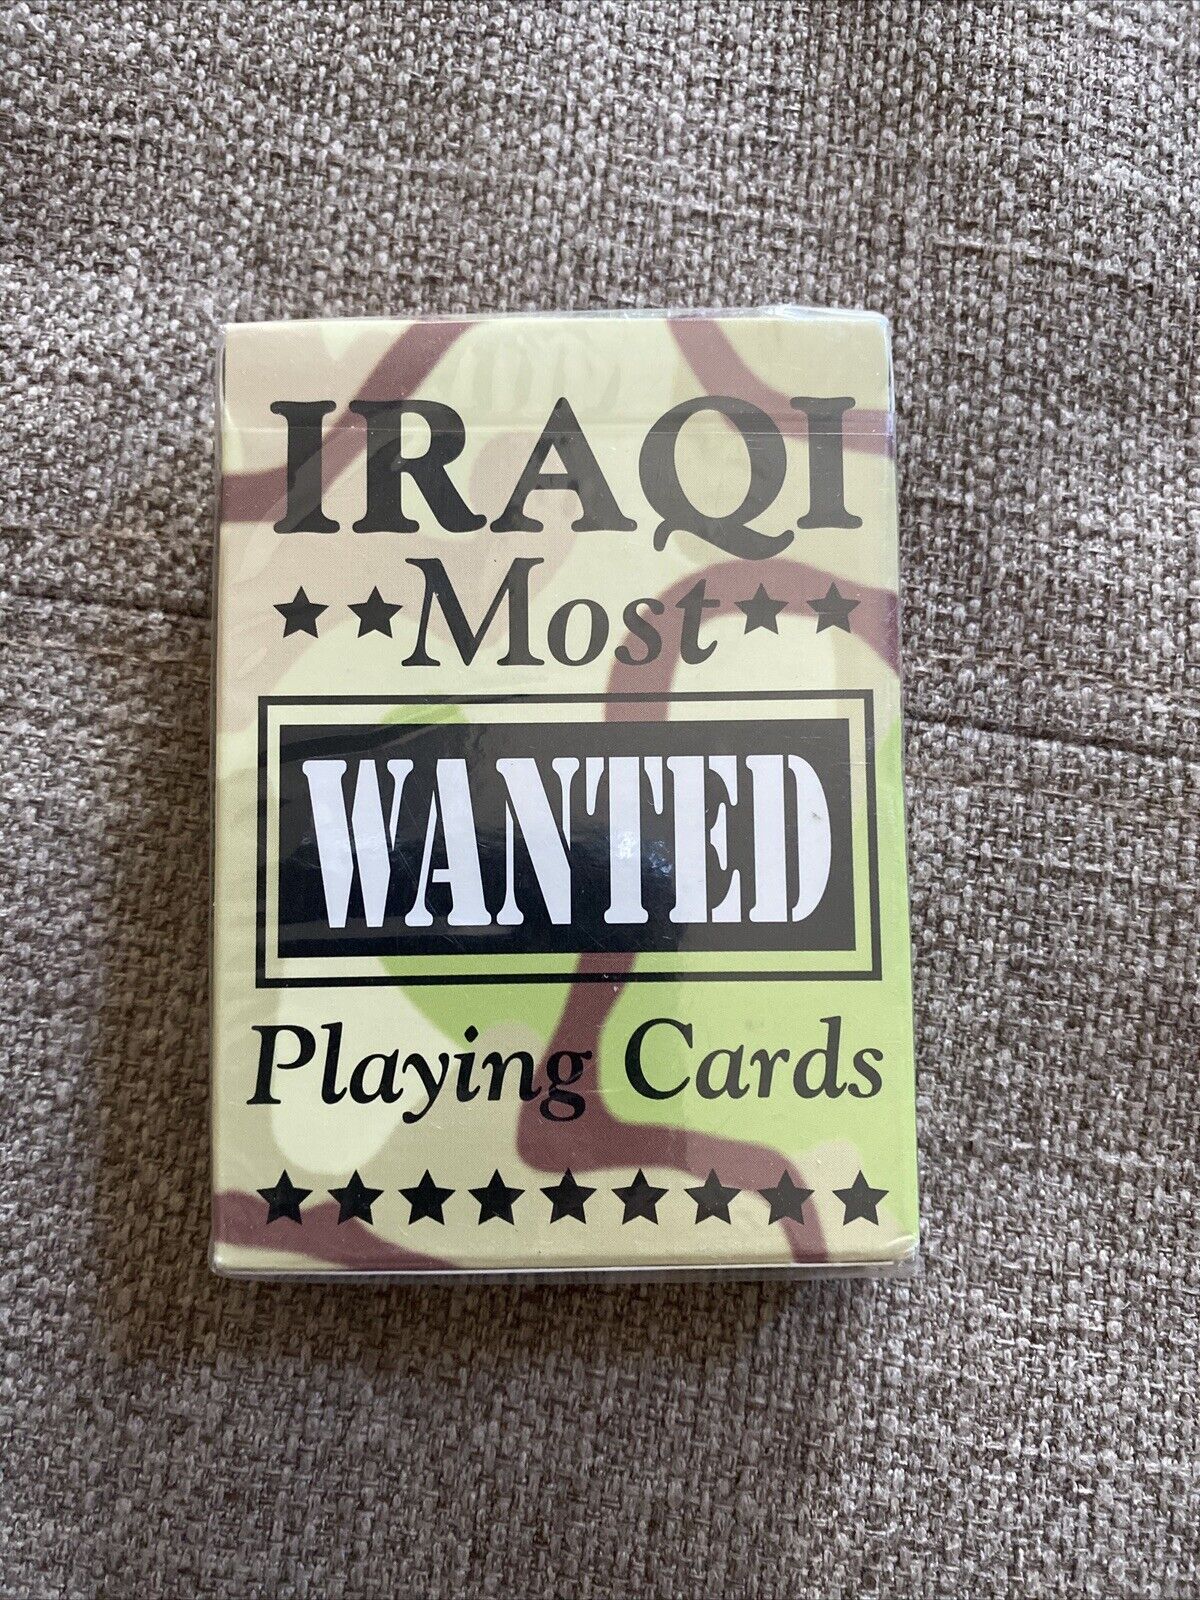 Bicycle Iraqi Most Wanted Playing Cards Hoyle New Sealed Desert Storm Made N USA